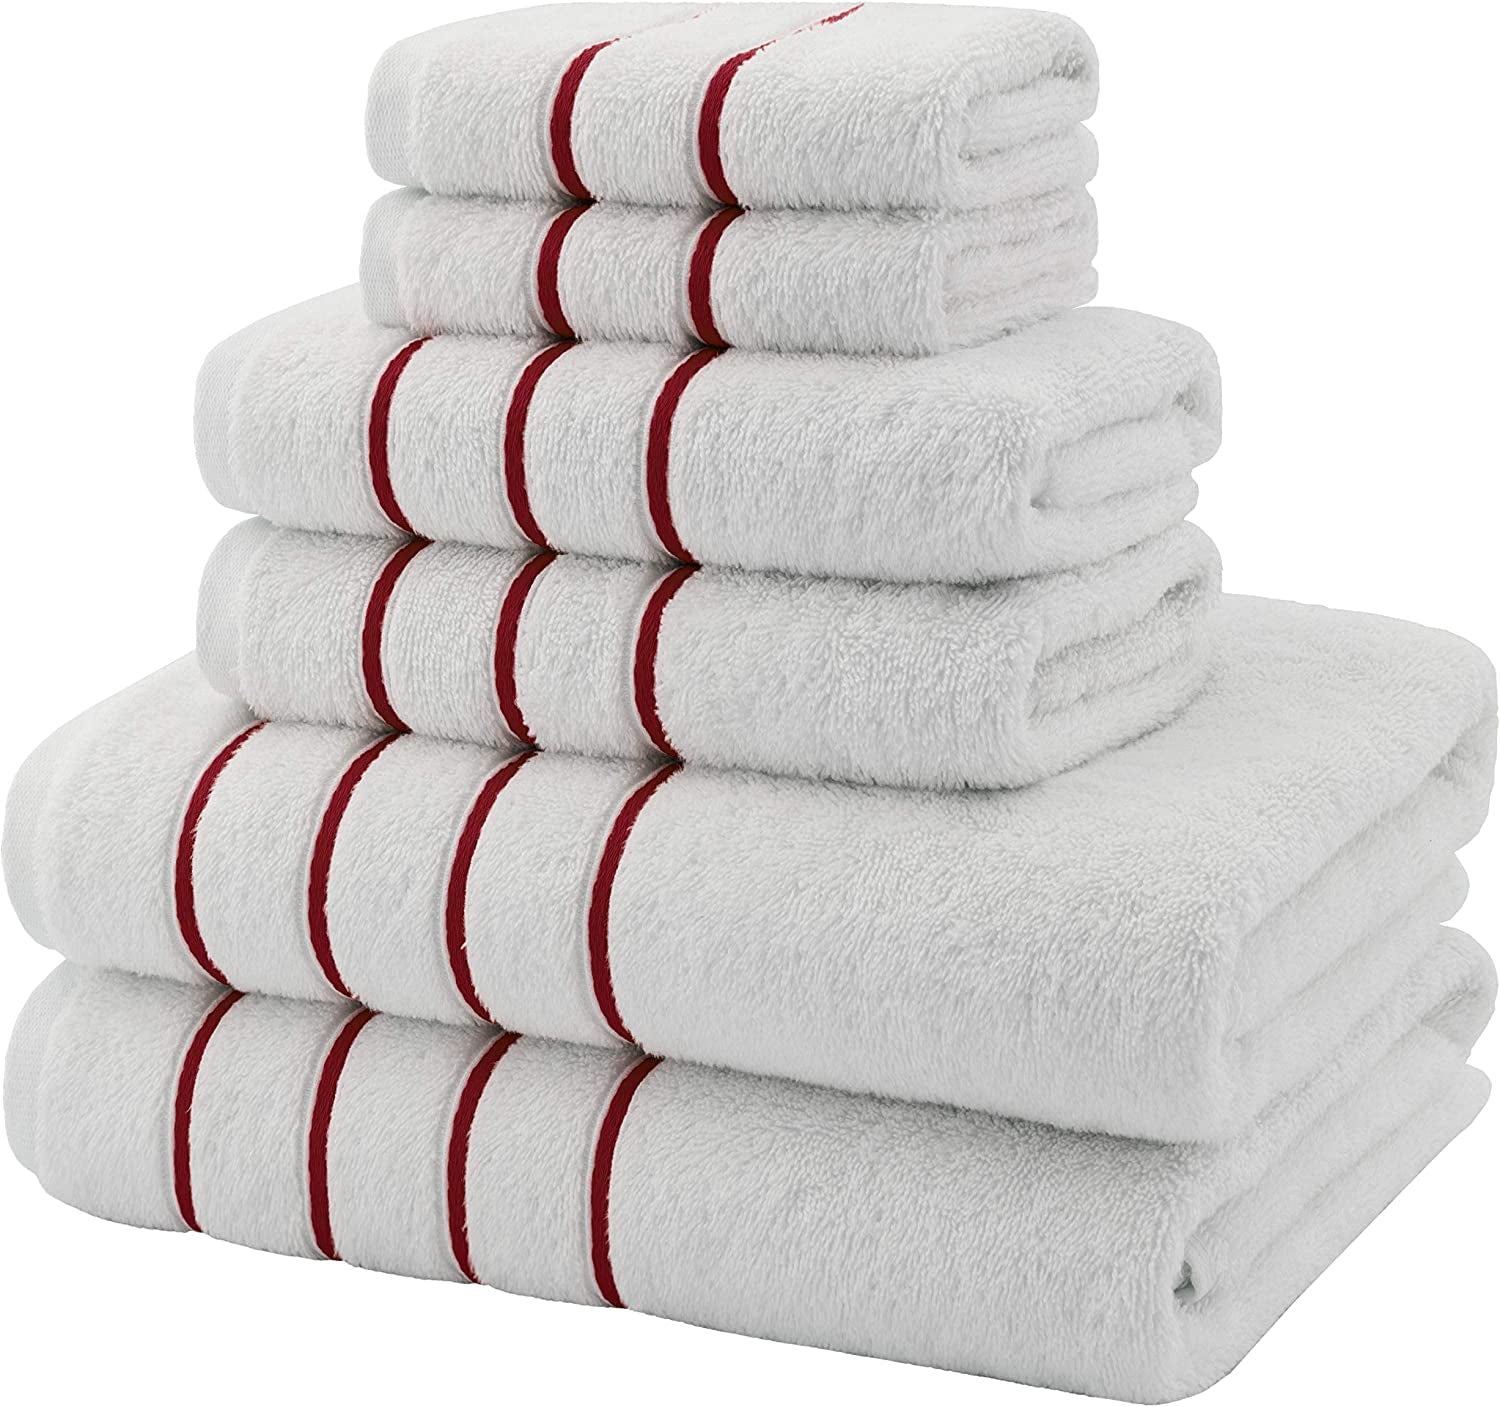 White and Burgundy Red 6 Piece Luxury Towel Set100% Turkish Cotton Soft Towels